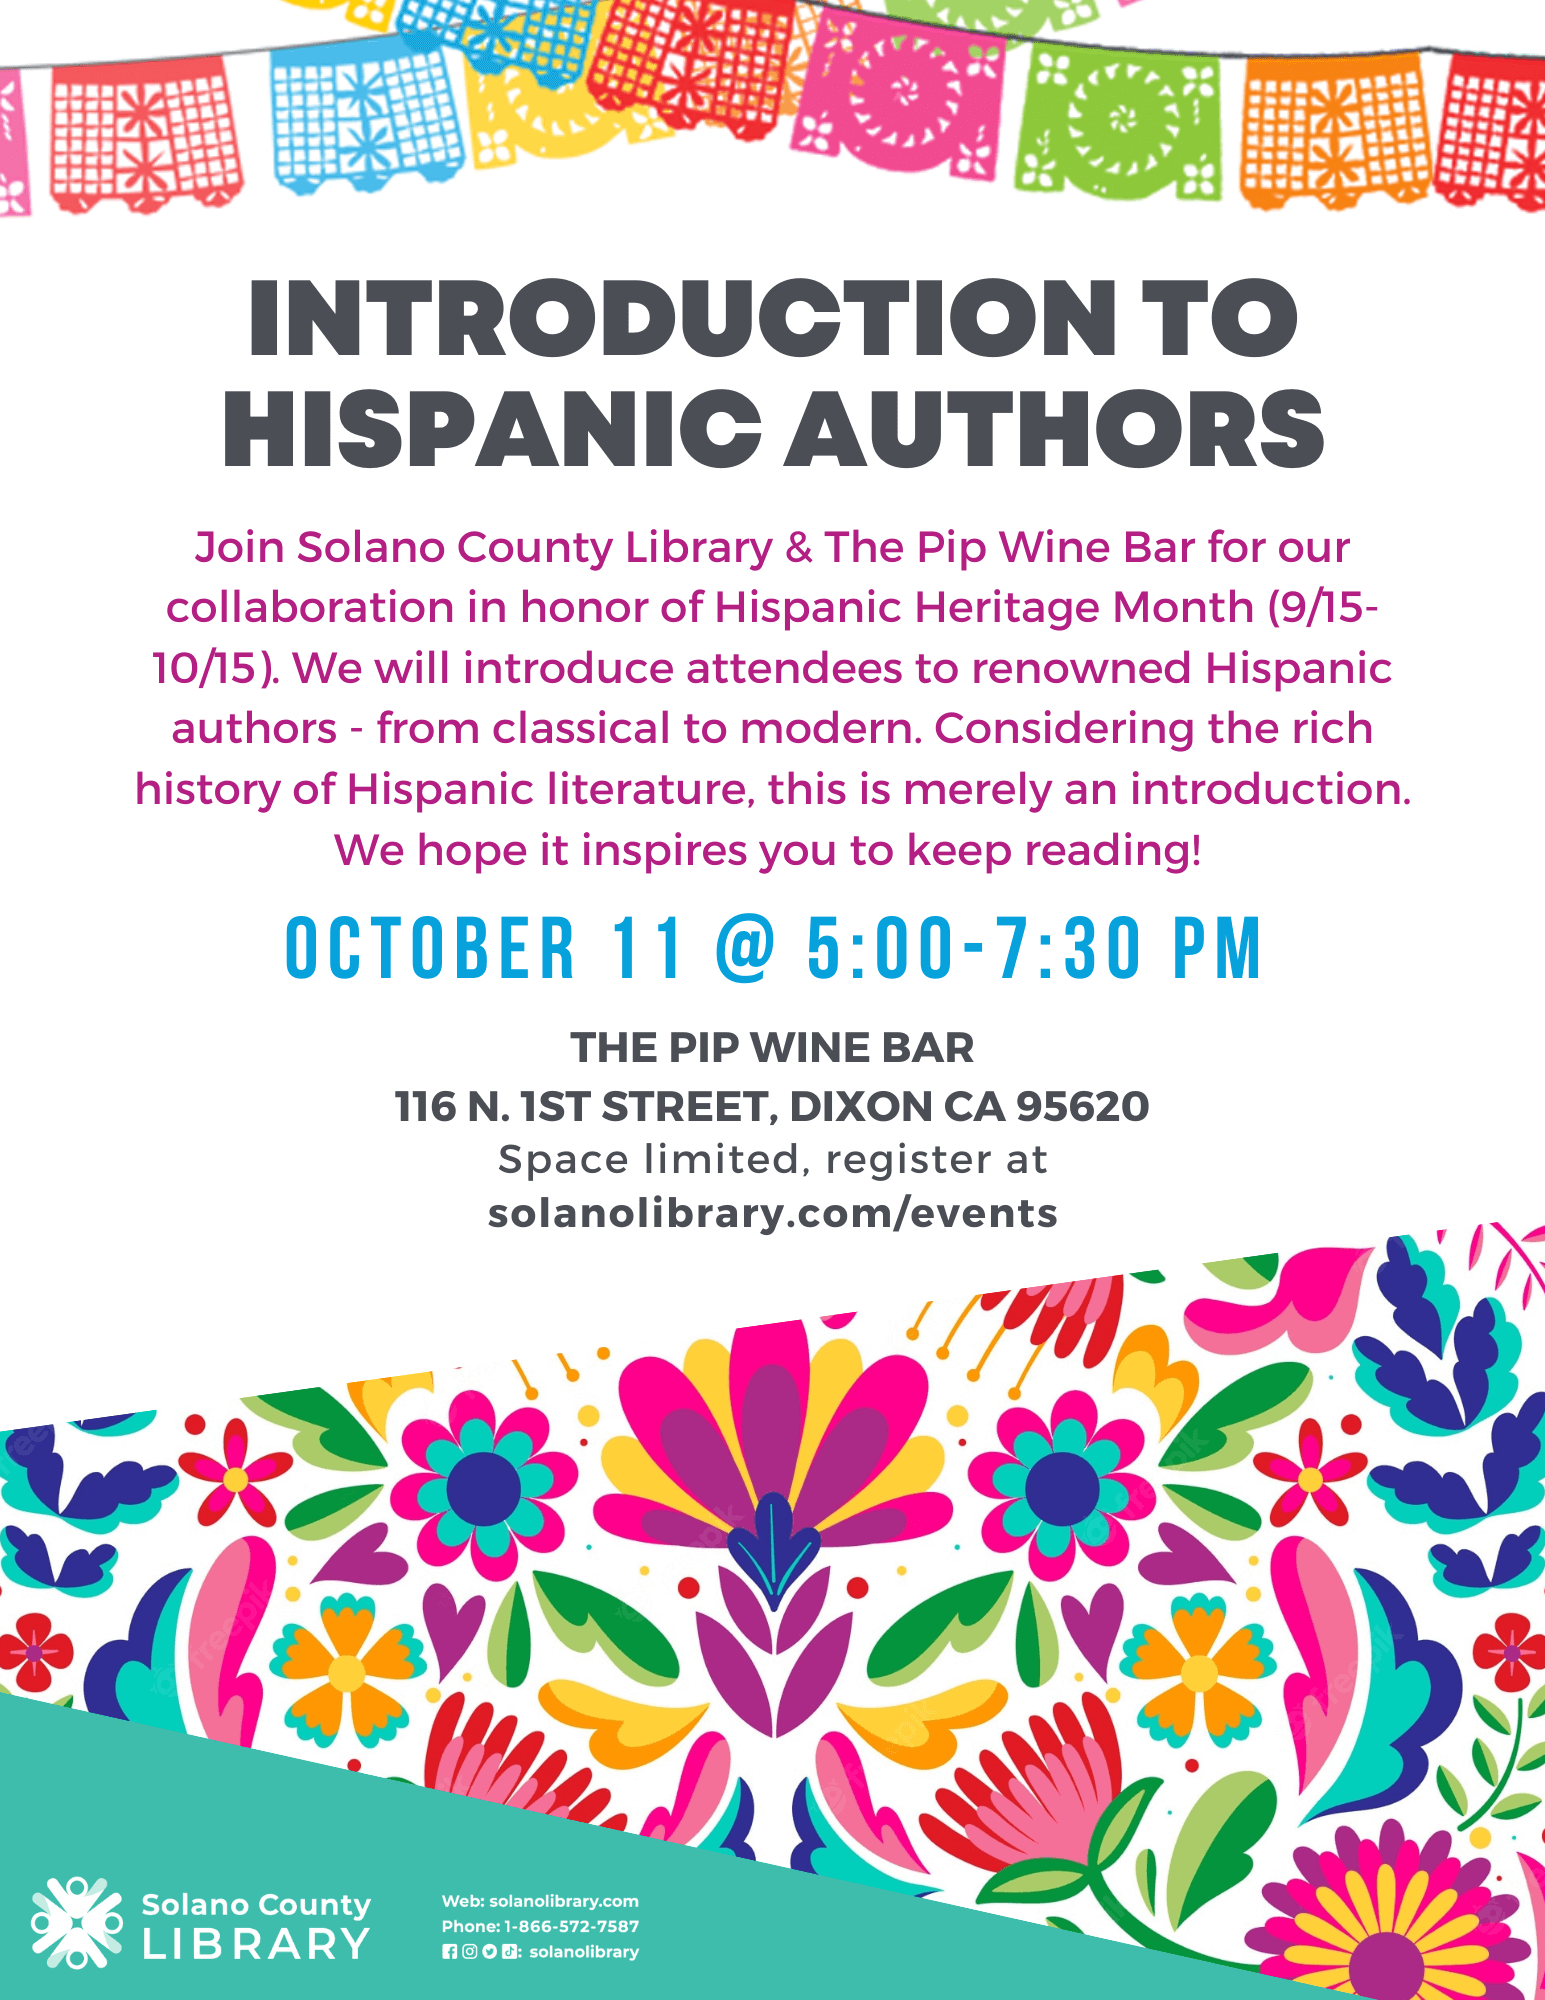 Solano County Library and The Pip Wine Bar celebrate Hispanic Heritage Month on October 11 at 5 pm by introducing you to renowned Hispanic authors and literature. Find an author that inspires you!